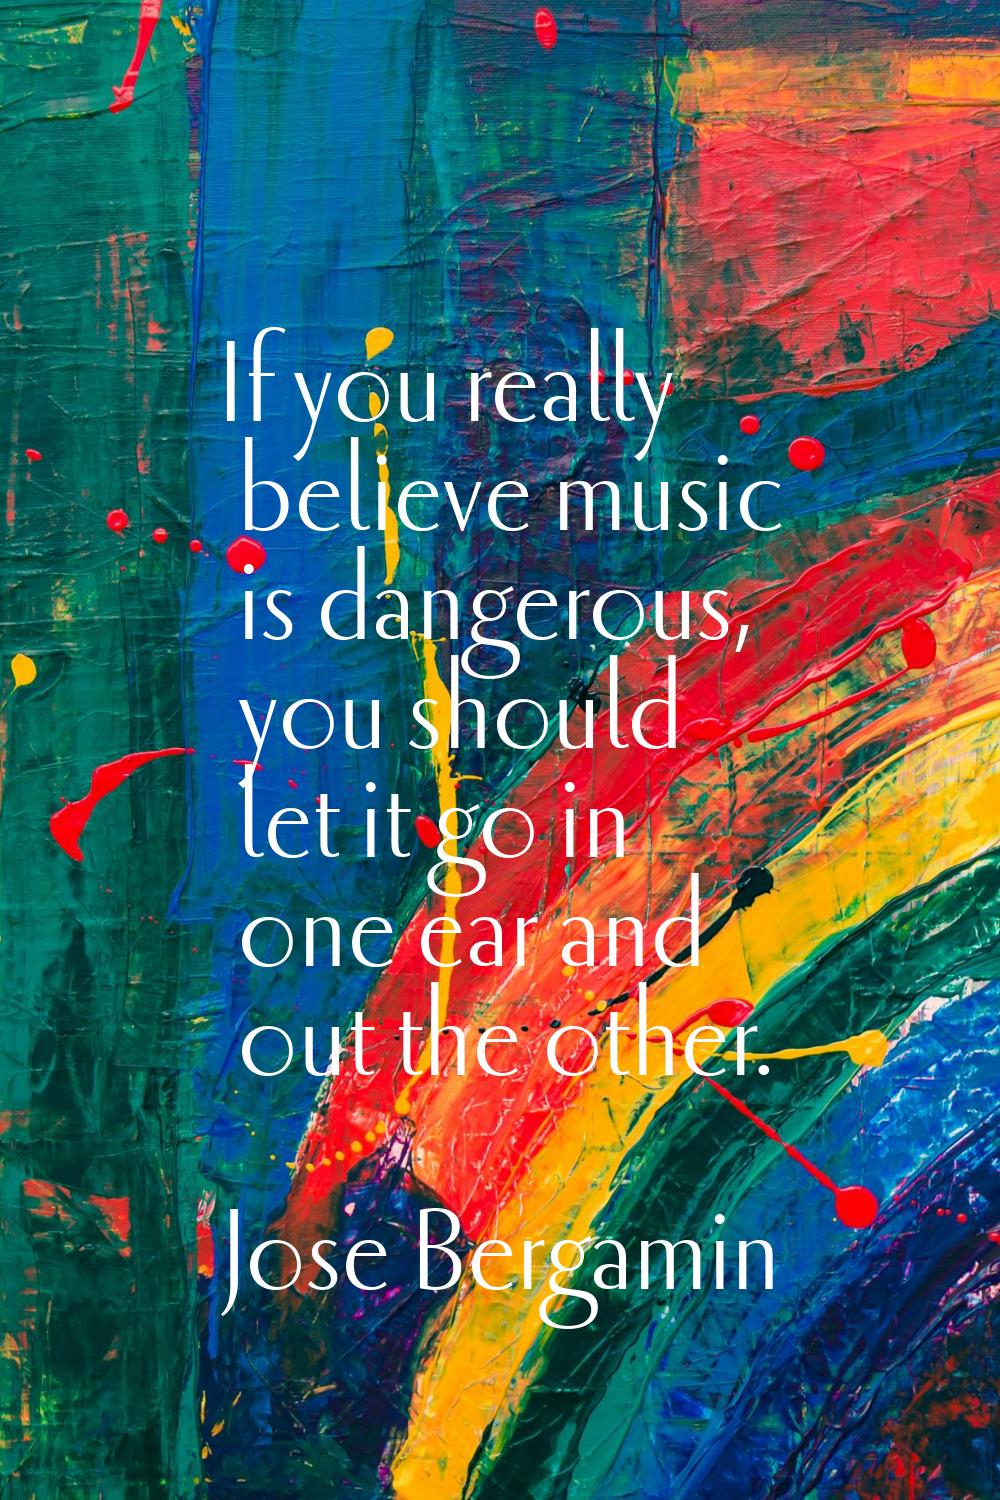 If you really believe music is dangerous, you should let it go in one ear and out the other.